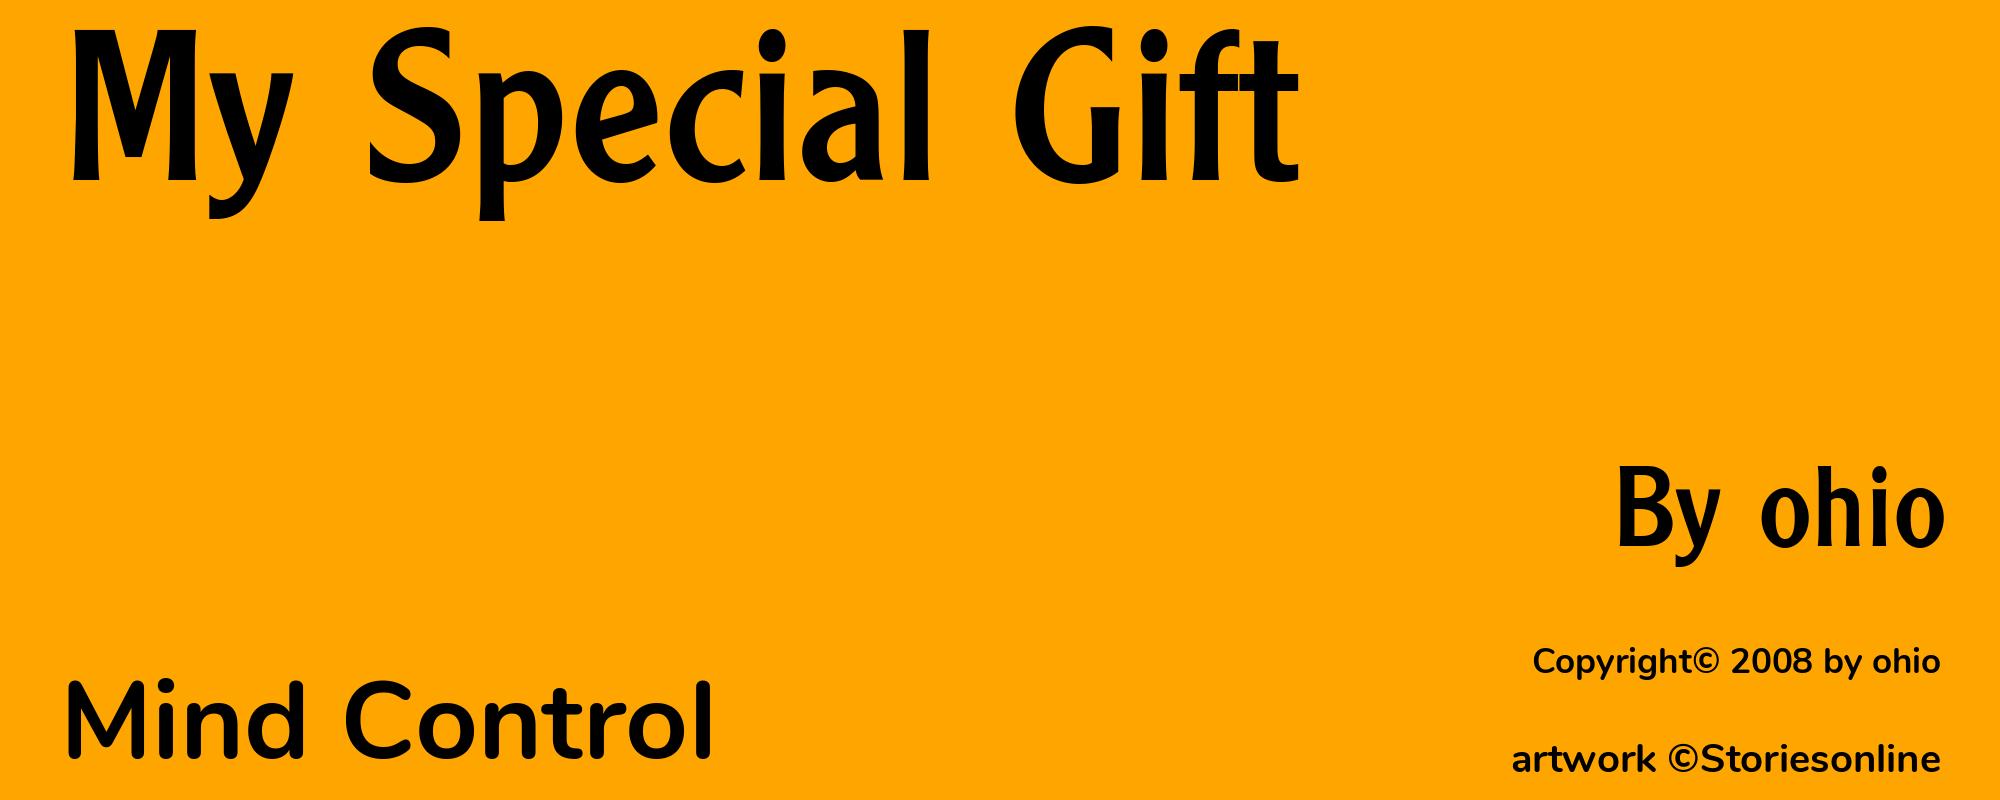 My Special Gift - Cover